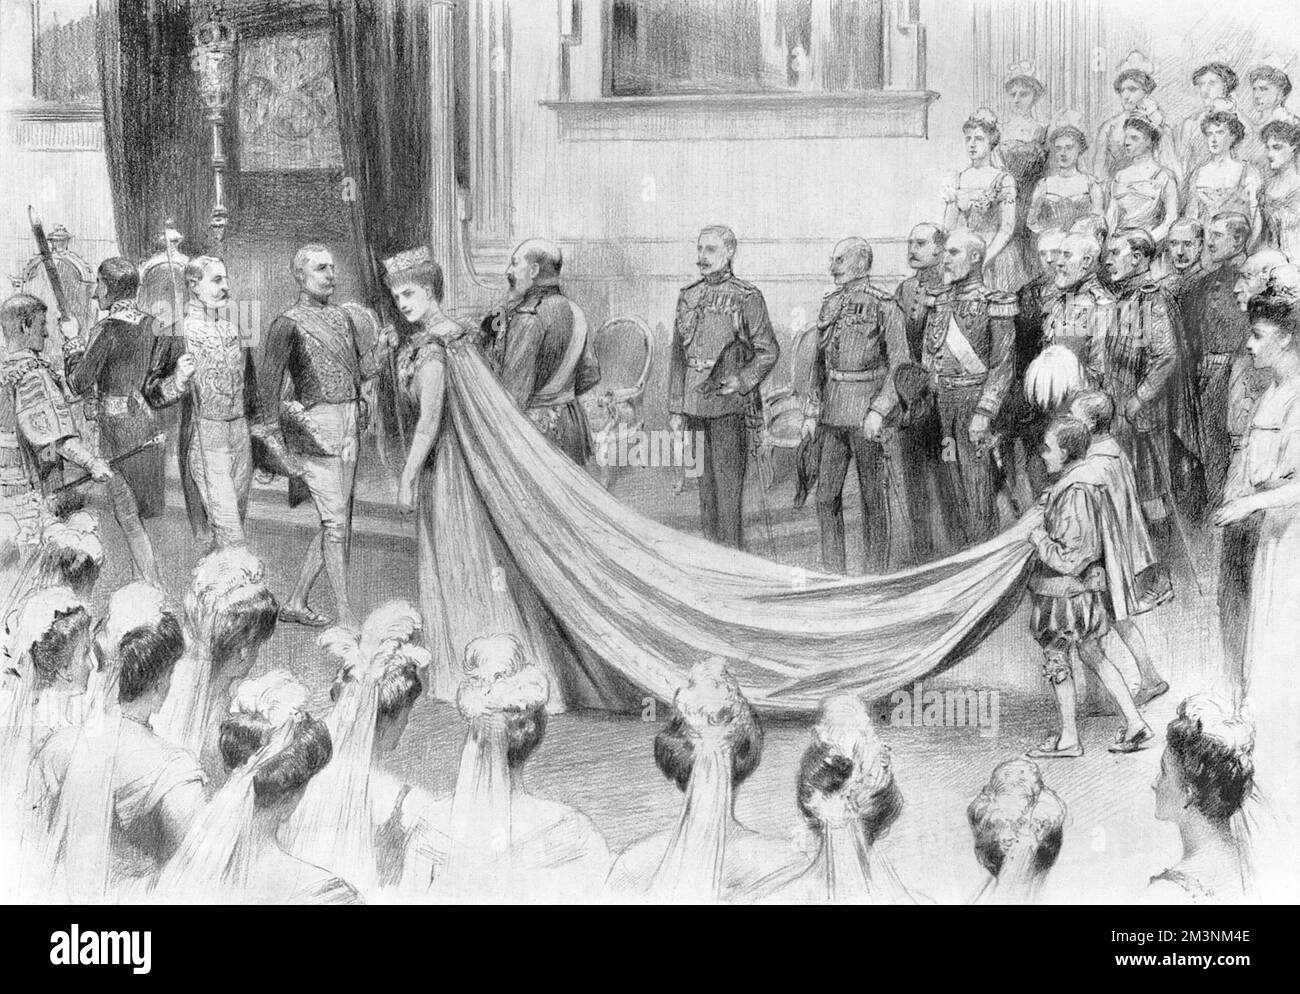 The King and Queen in Ireland: their Majesties' Court in Dublin Castle. Edward VII and Queen Alexandra entering St Patrick's Hall for the court ceremonial on the evening of 23rd July 1903. The royal procession was headed by Lord Dudley, the Lord Lieutenant of Ireland who bore the Sword of State.     Date: 23rd July 1903 Stock Photo